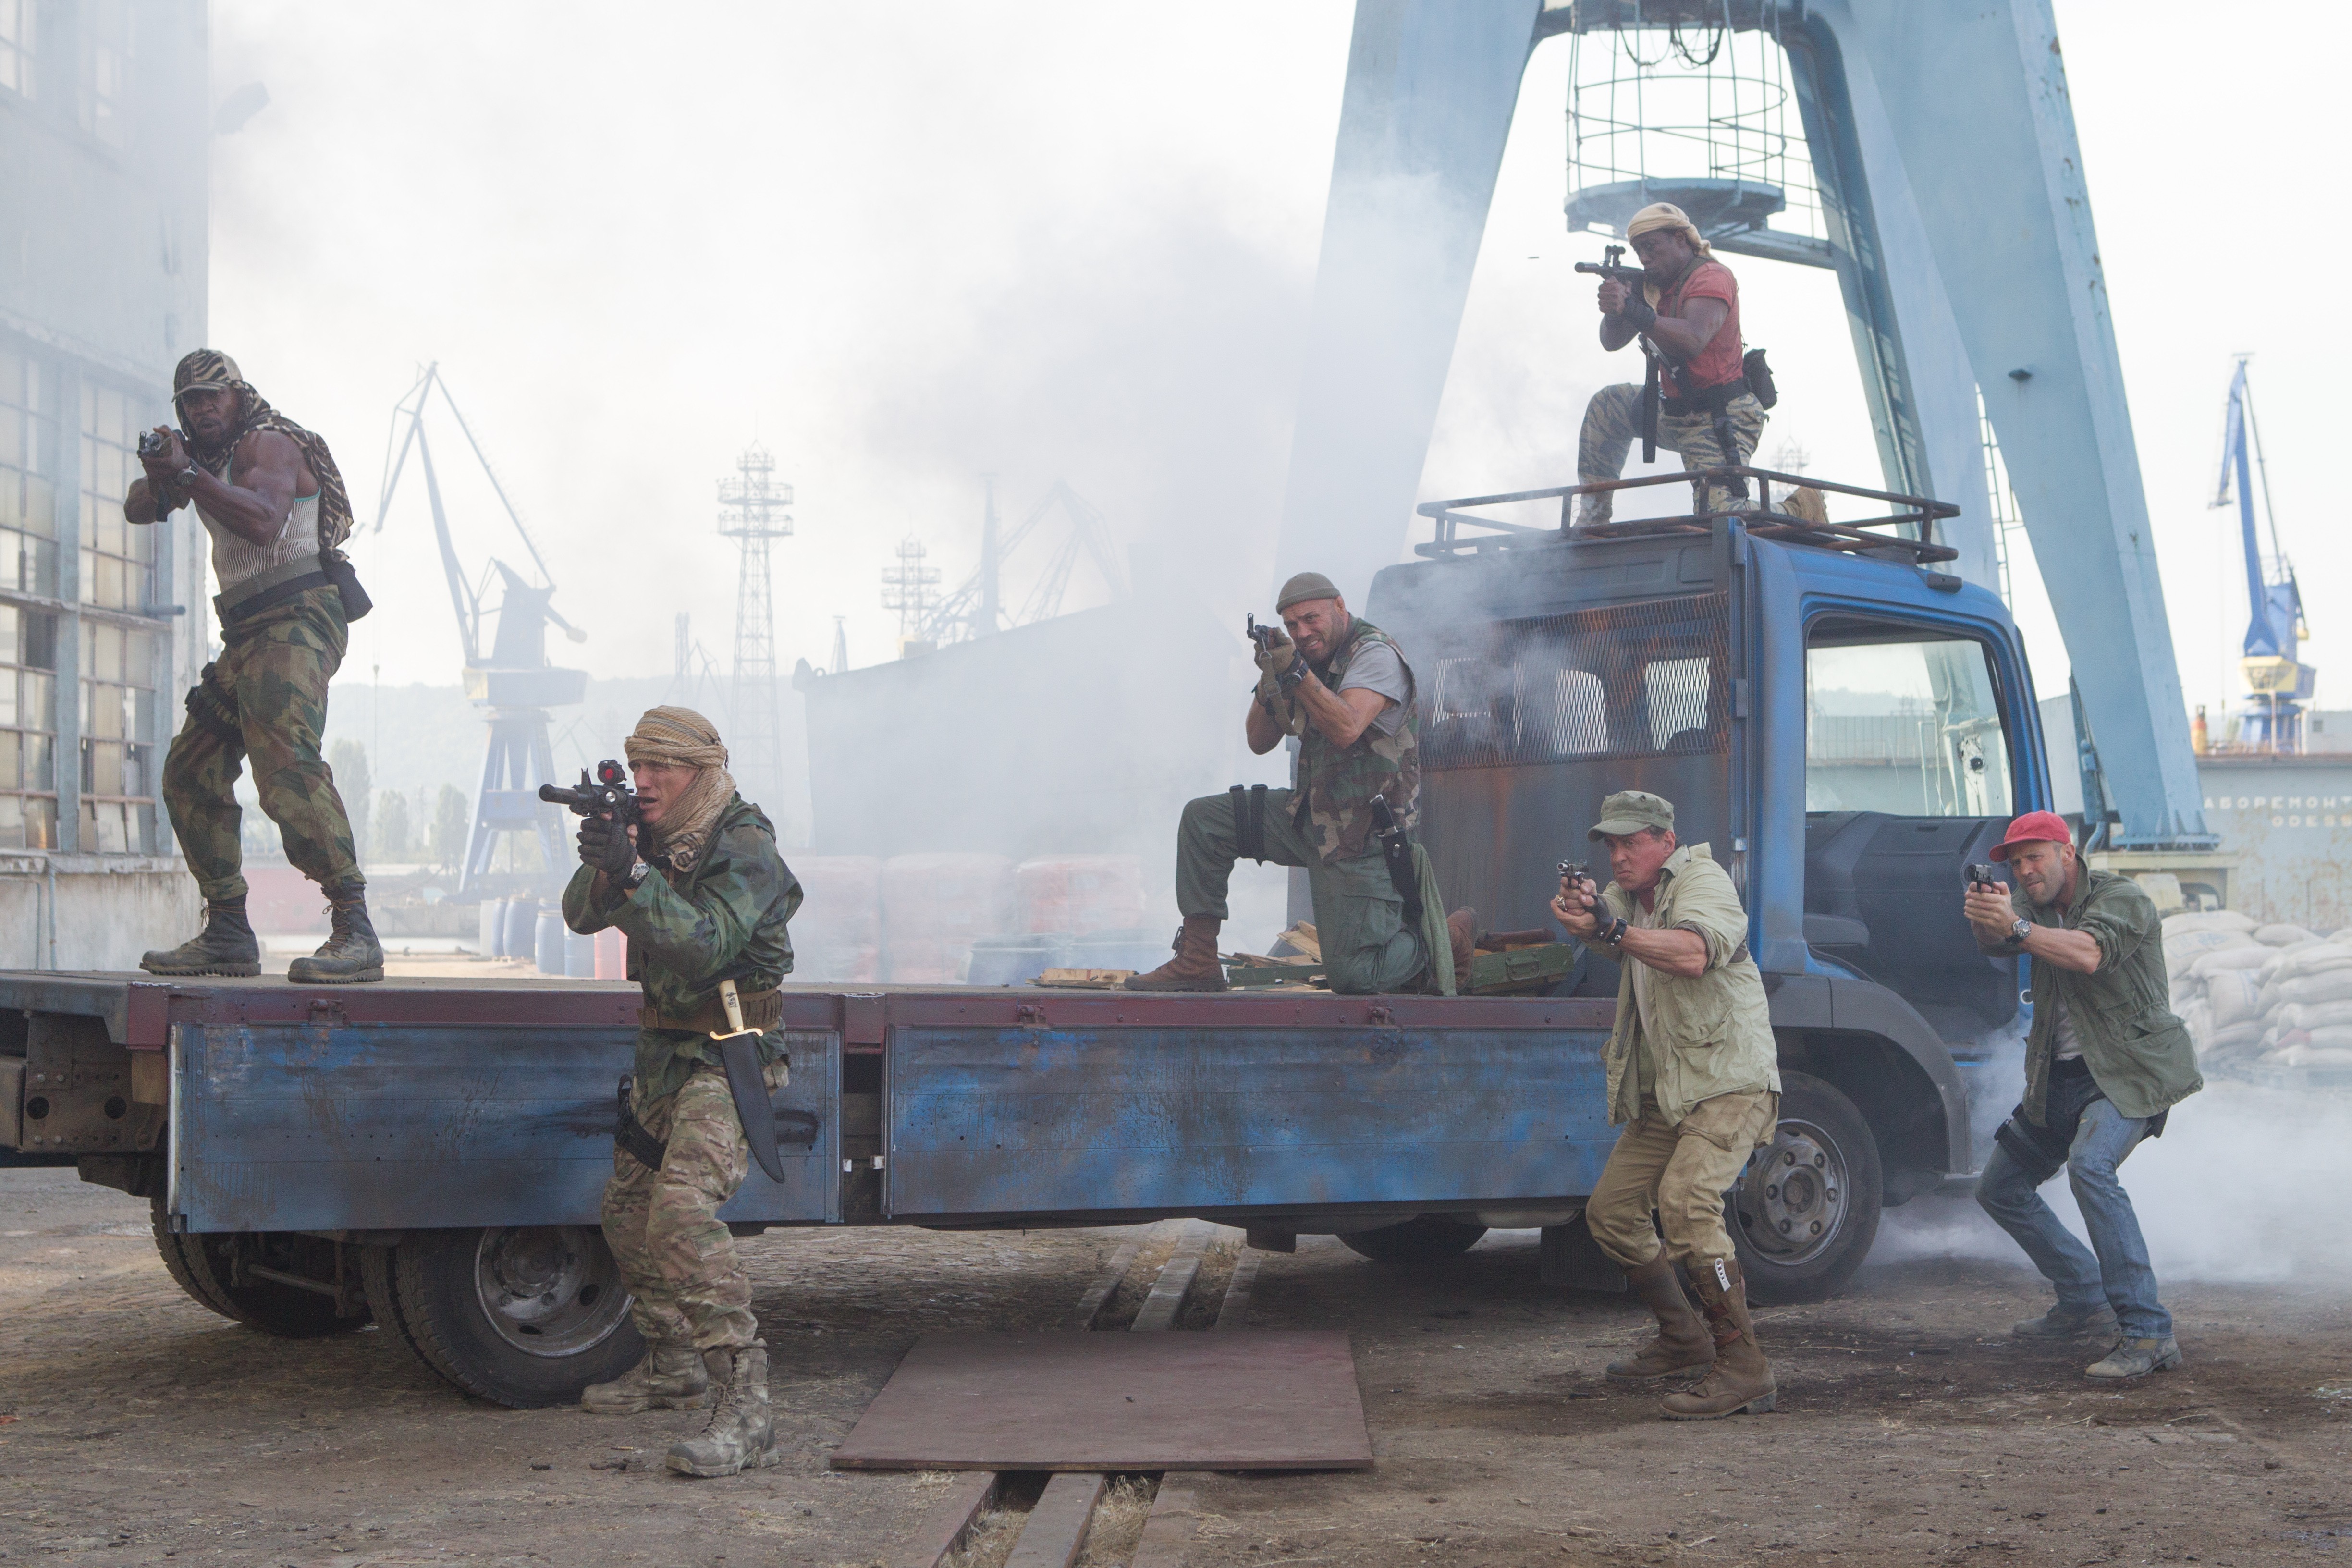 movie, the expendables 3, barney ross, doc (the expendables), dolph lundgren, gunnar jensen, hale caesar, jason statham, lee christmas, randy couture, sylvester stallone, terry crews, toll road, wesley snipes, the expendables Free Stock Photo